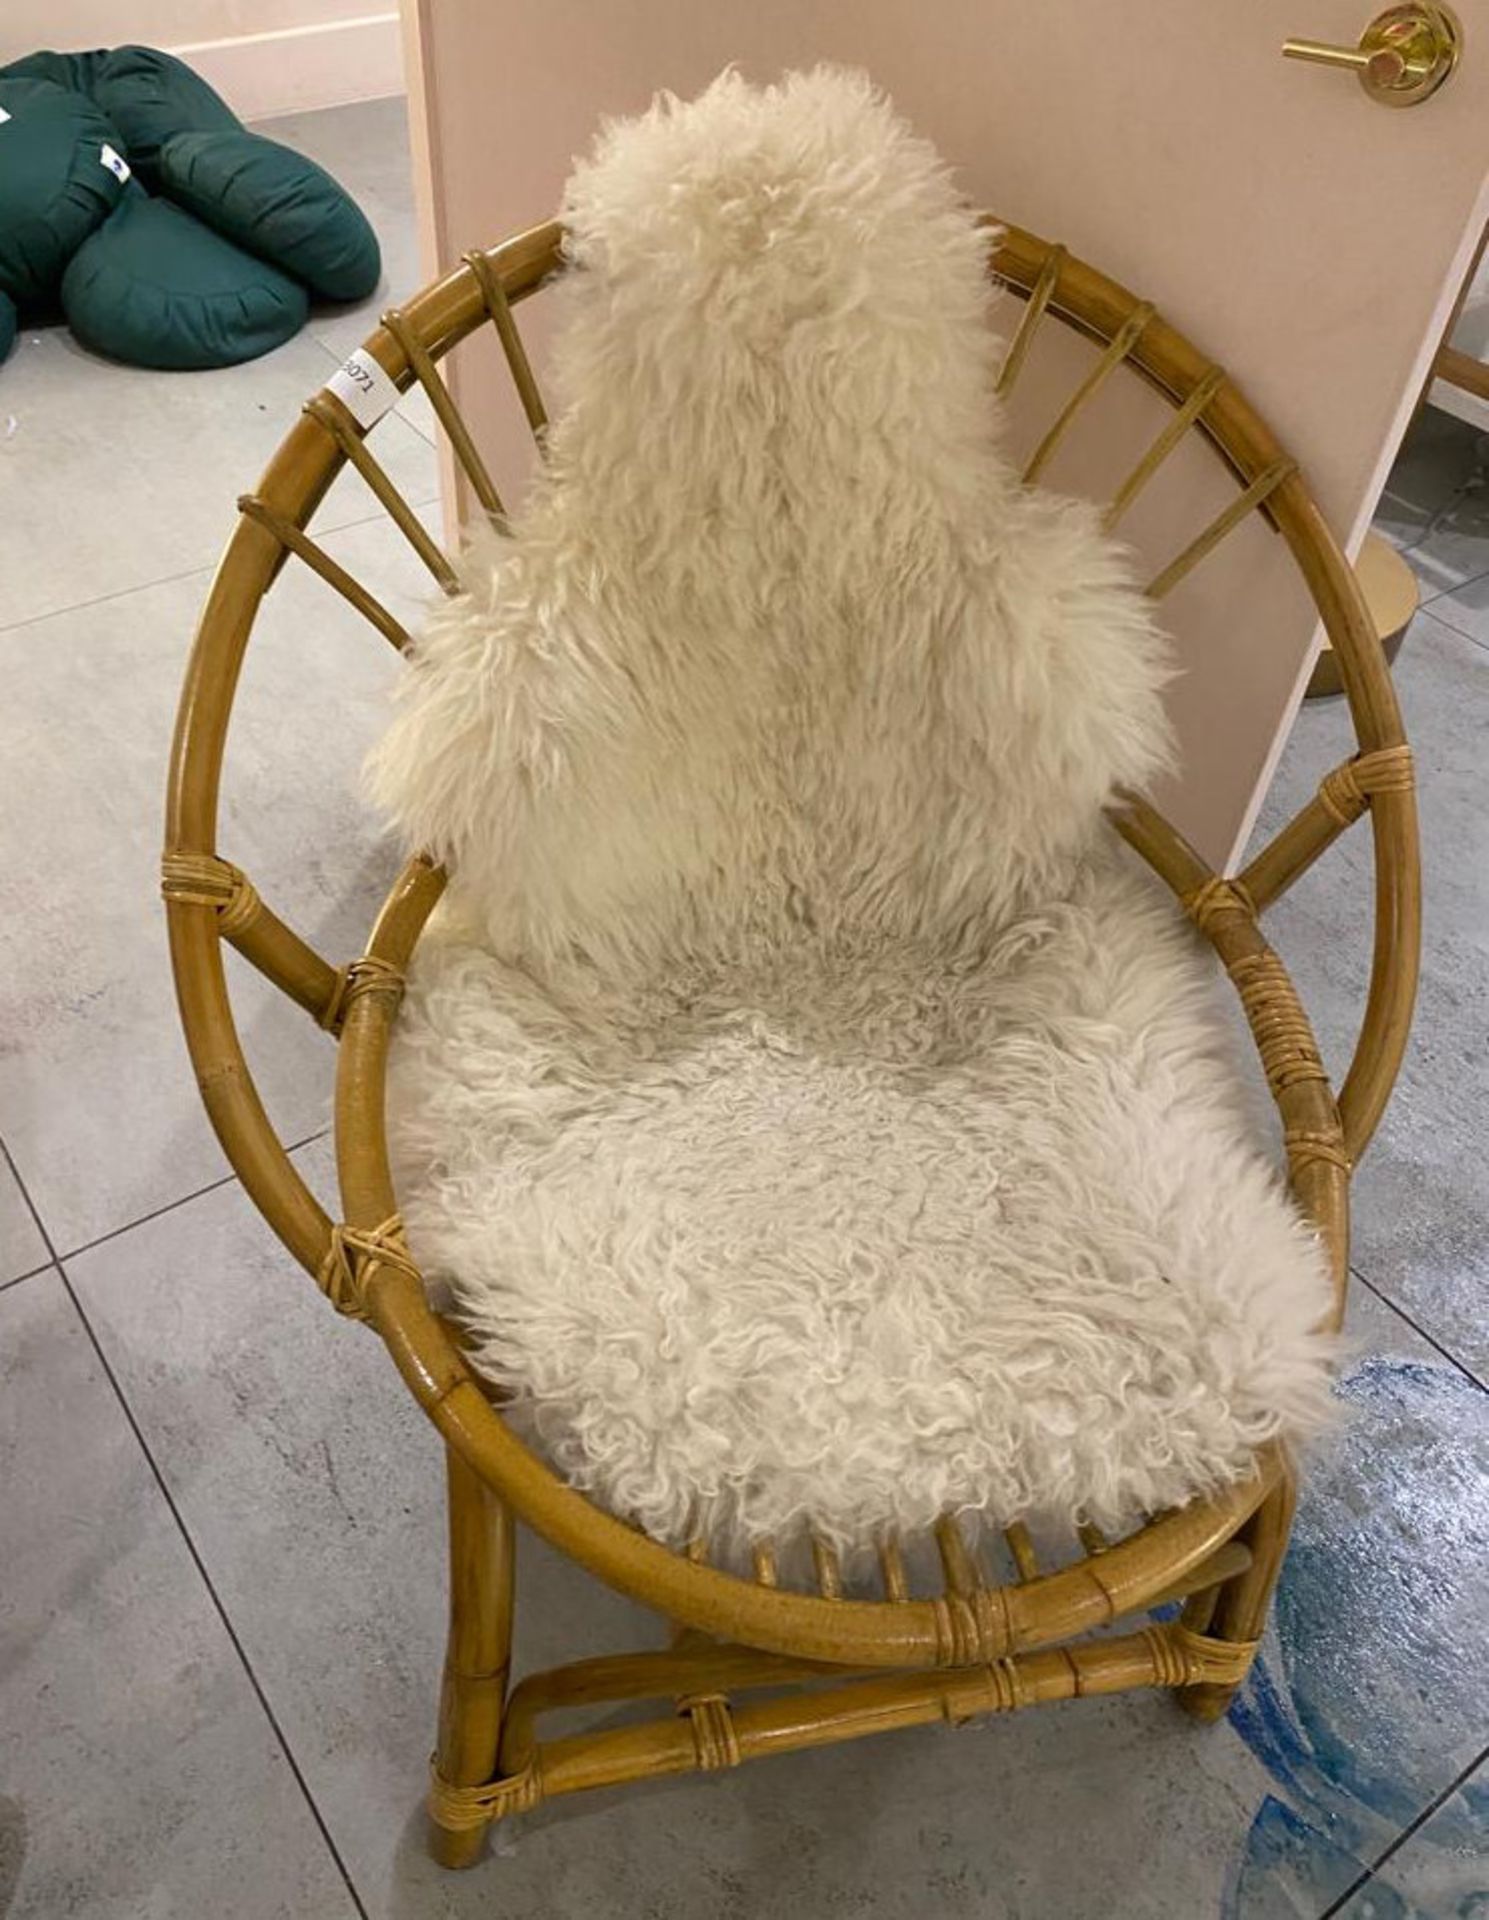 1 x Bamboo Chair With White Fluffy Cushions - CL776 - Ref: GB071 - Location: London W1WFrom a